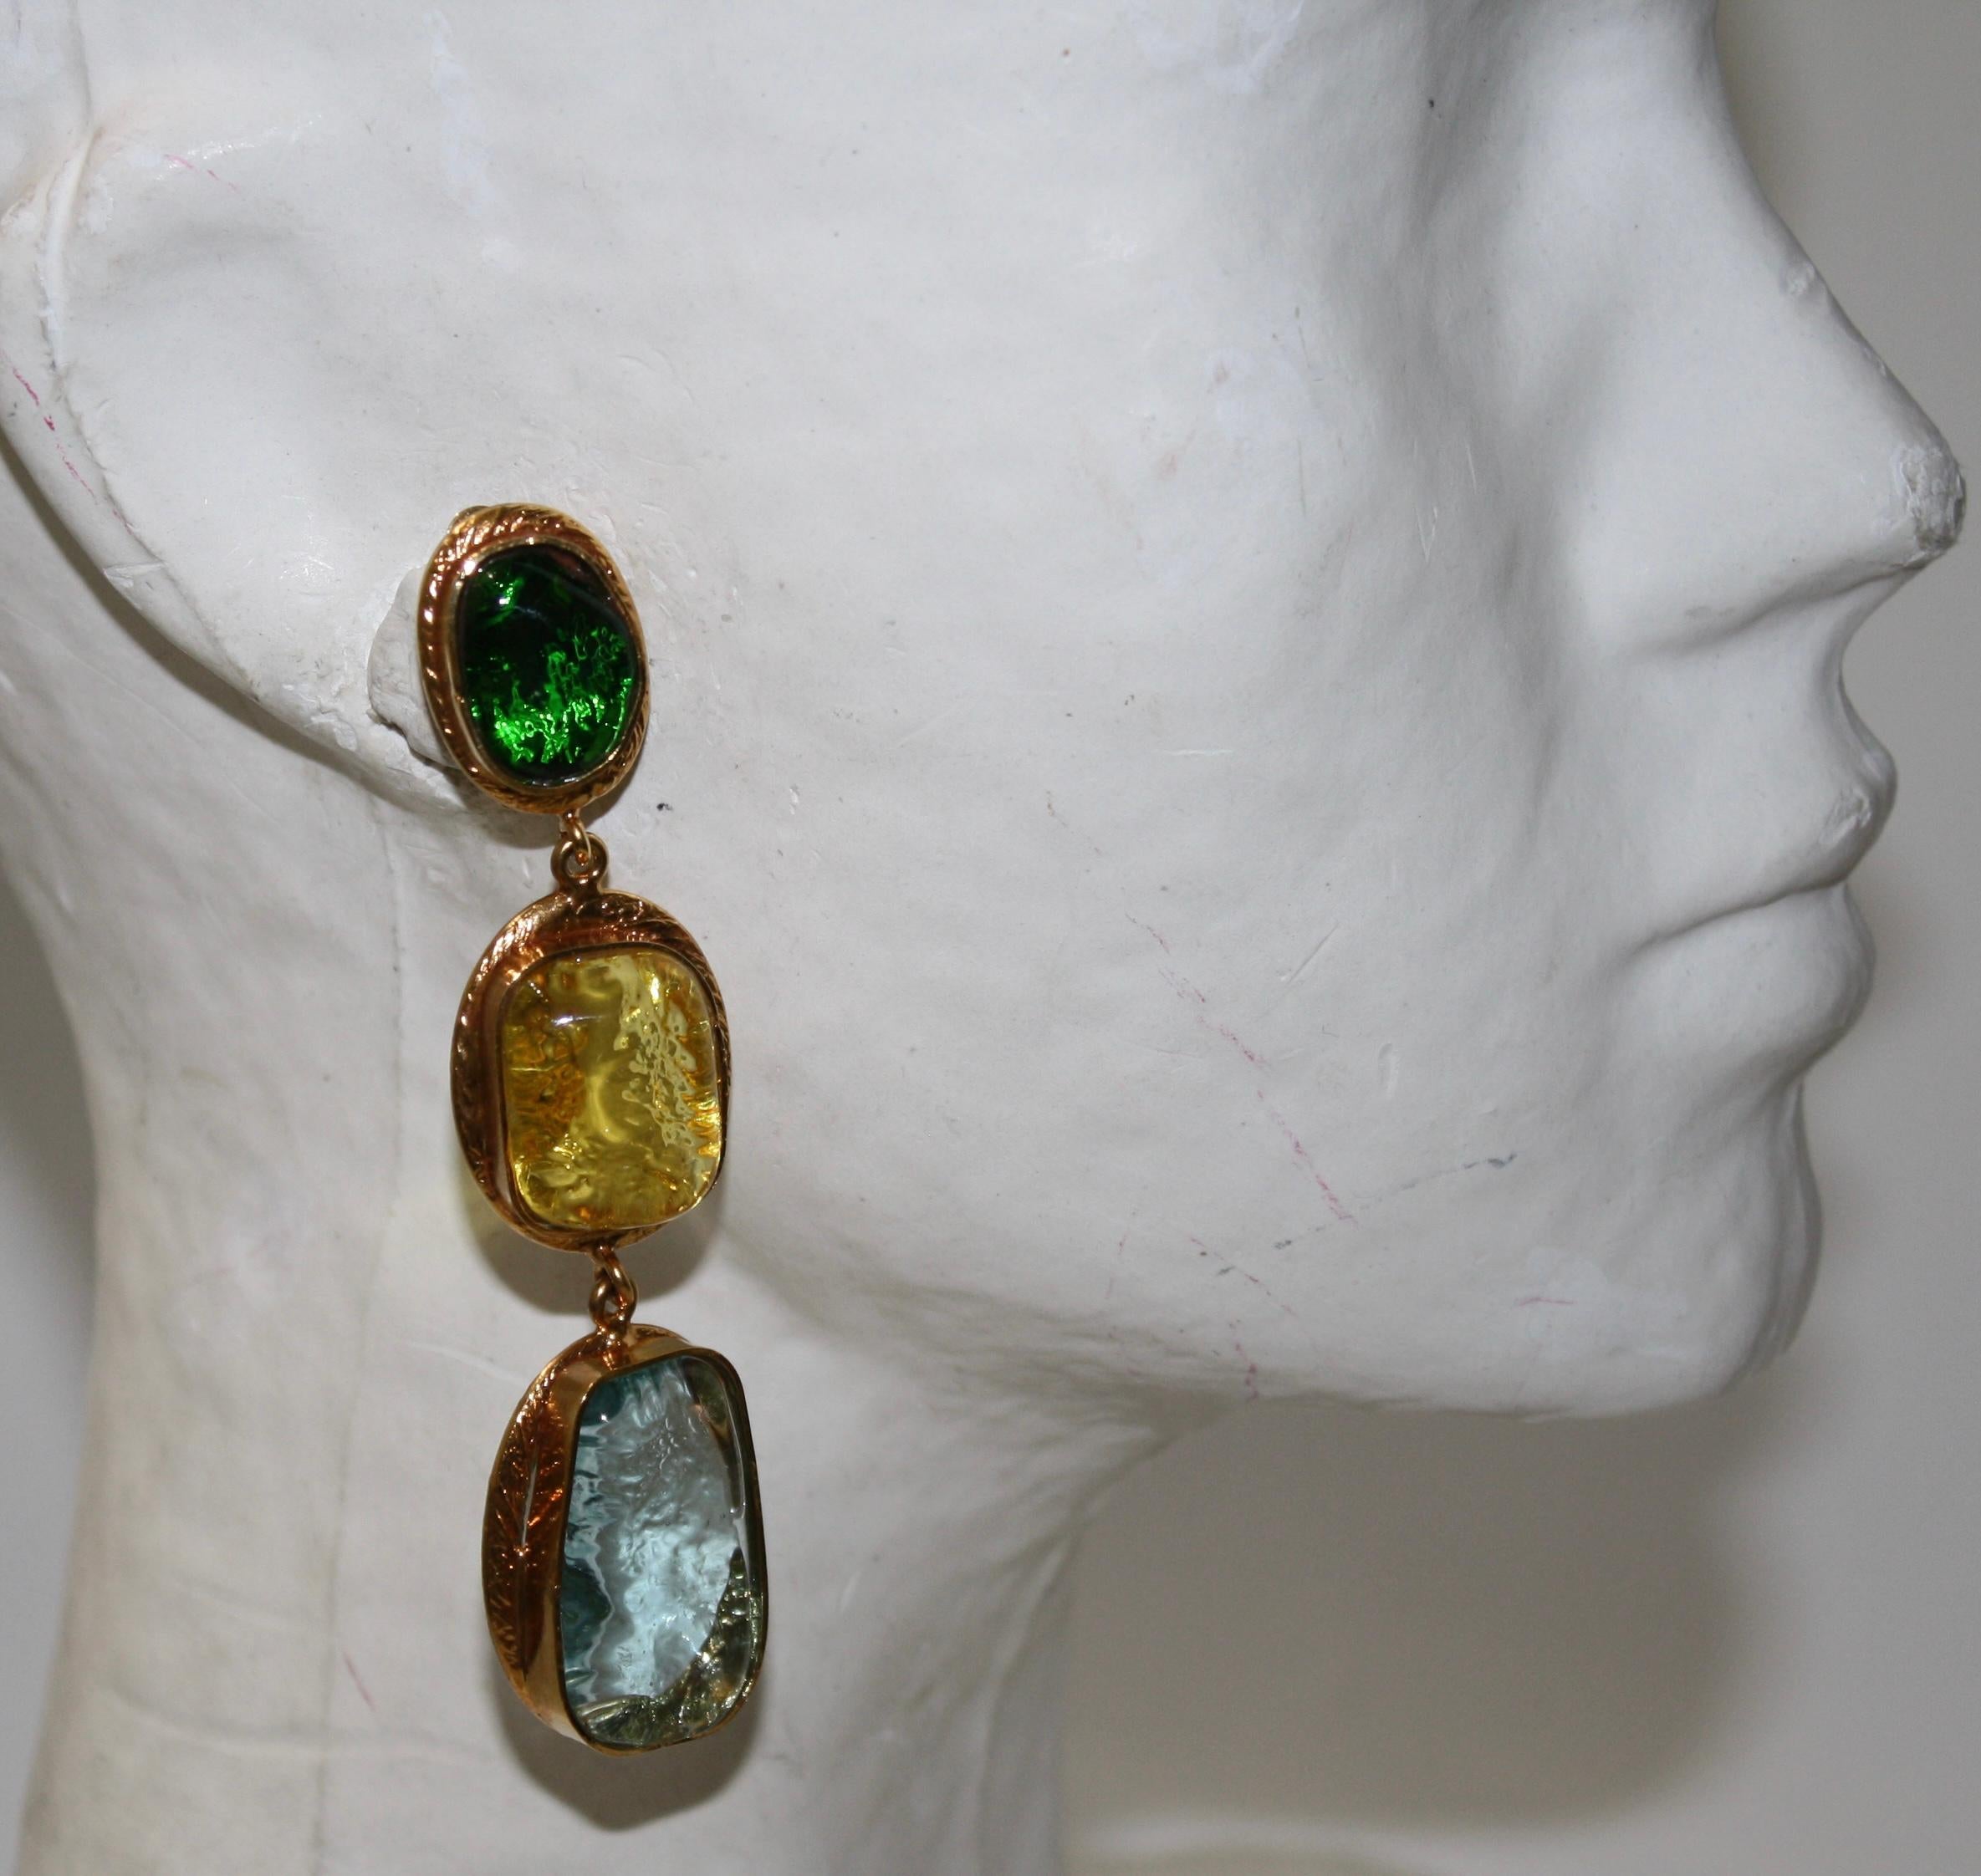 Clip earrings set on 24-carat gilded brass . Exquisite colors of Pate de verre of poured glass, a French process created  by the House of GRIPOIX.